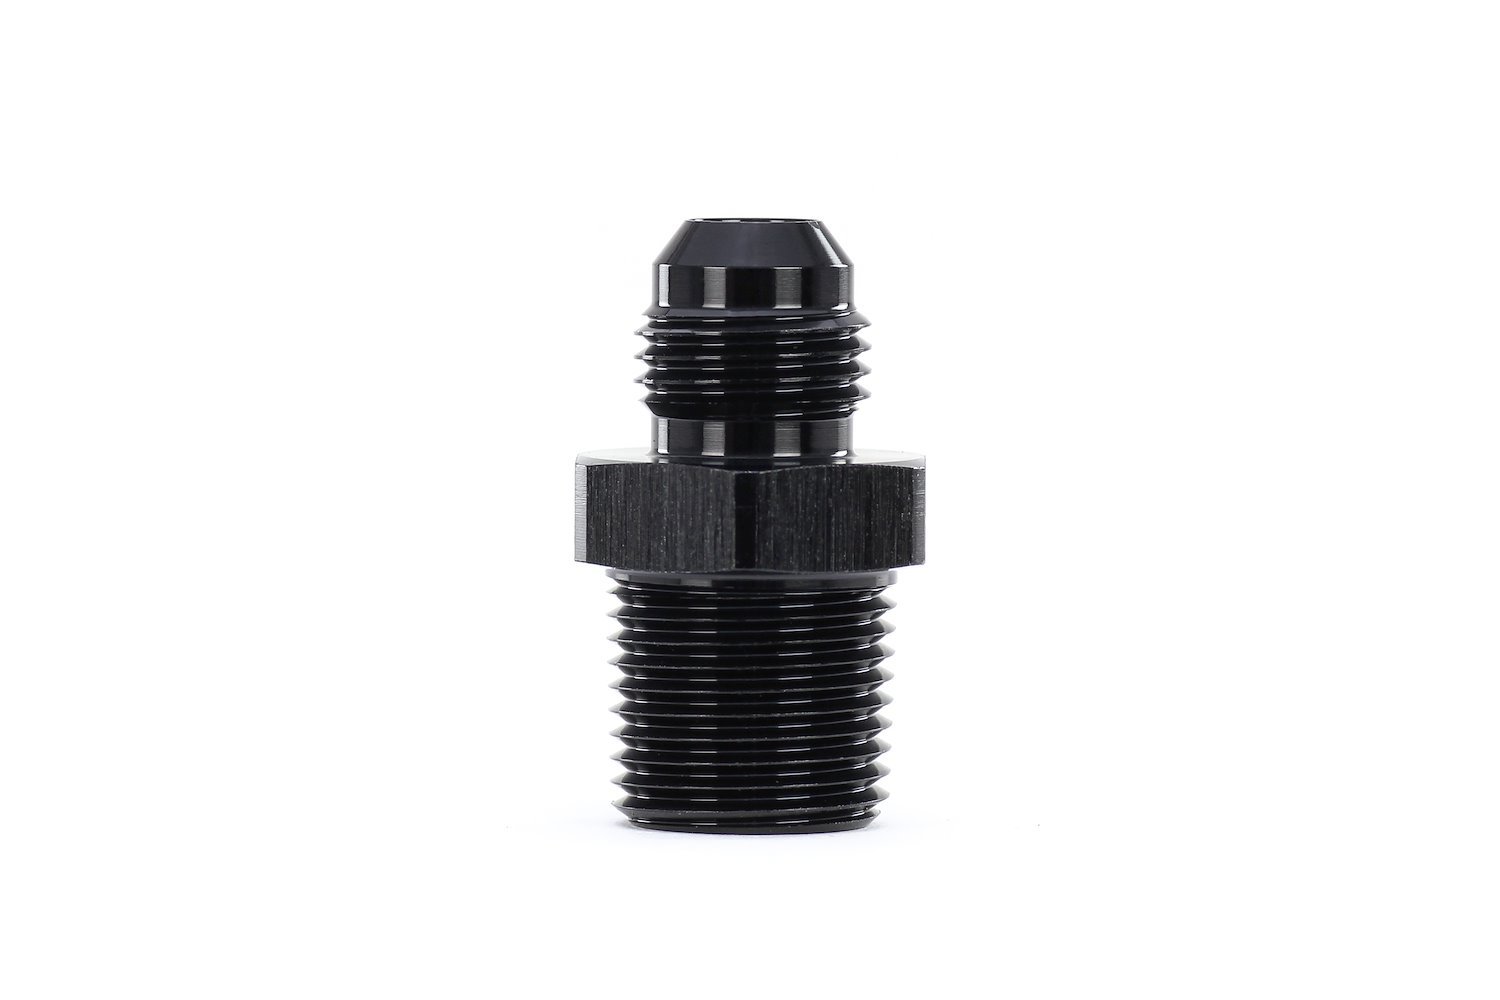 AN81666 AN Flare to NPT Straight Adapter, Convert from NPT Pipe Thread To An Flare